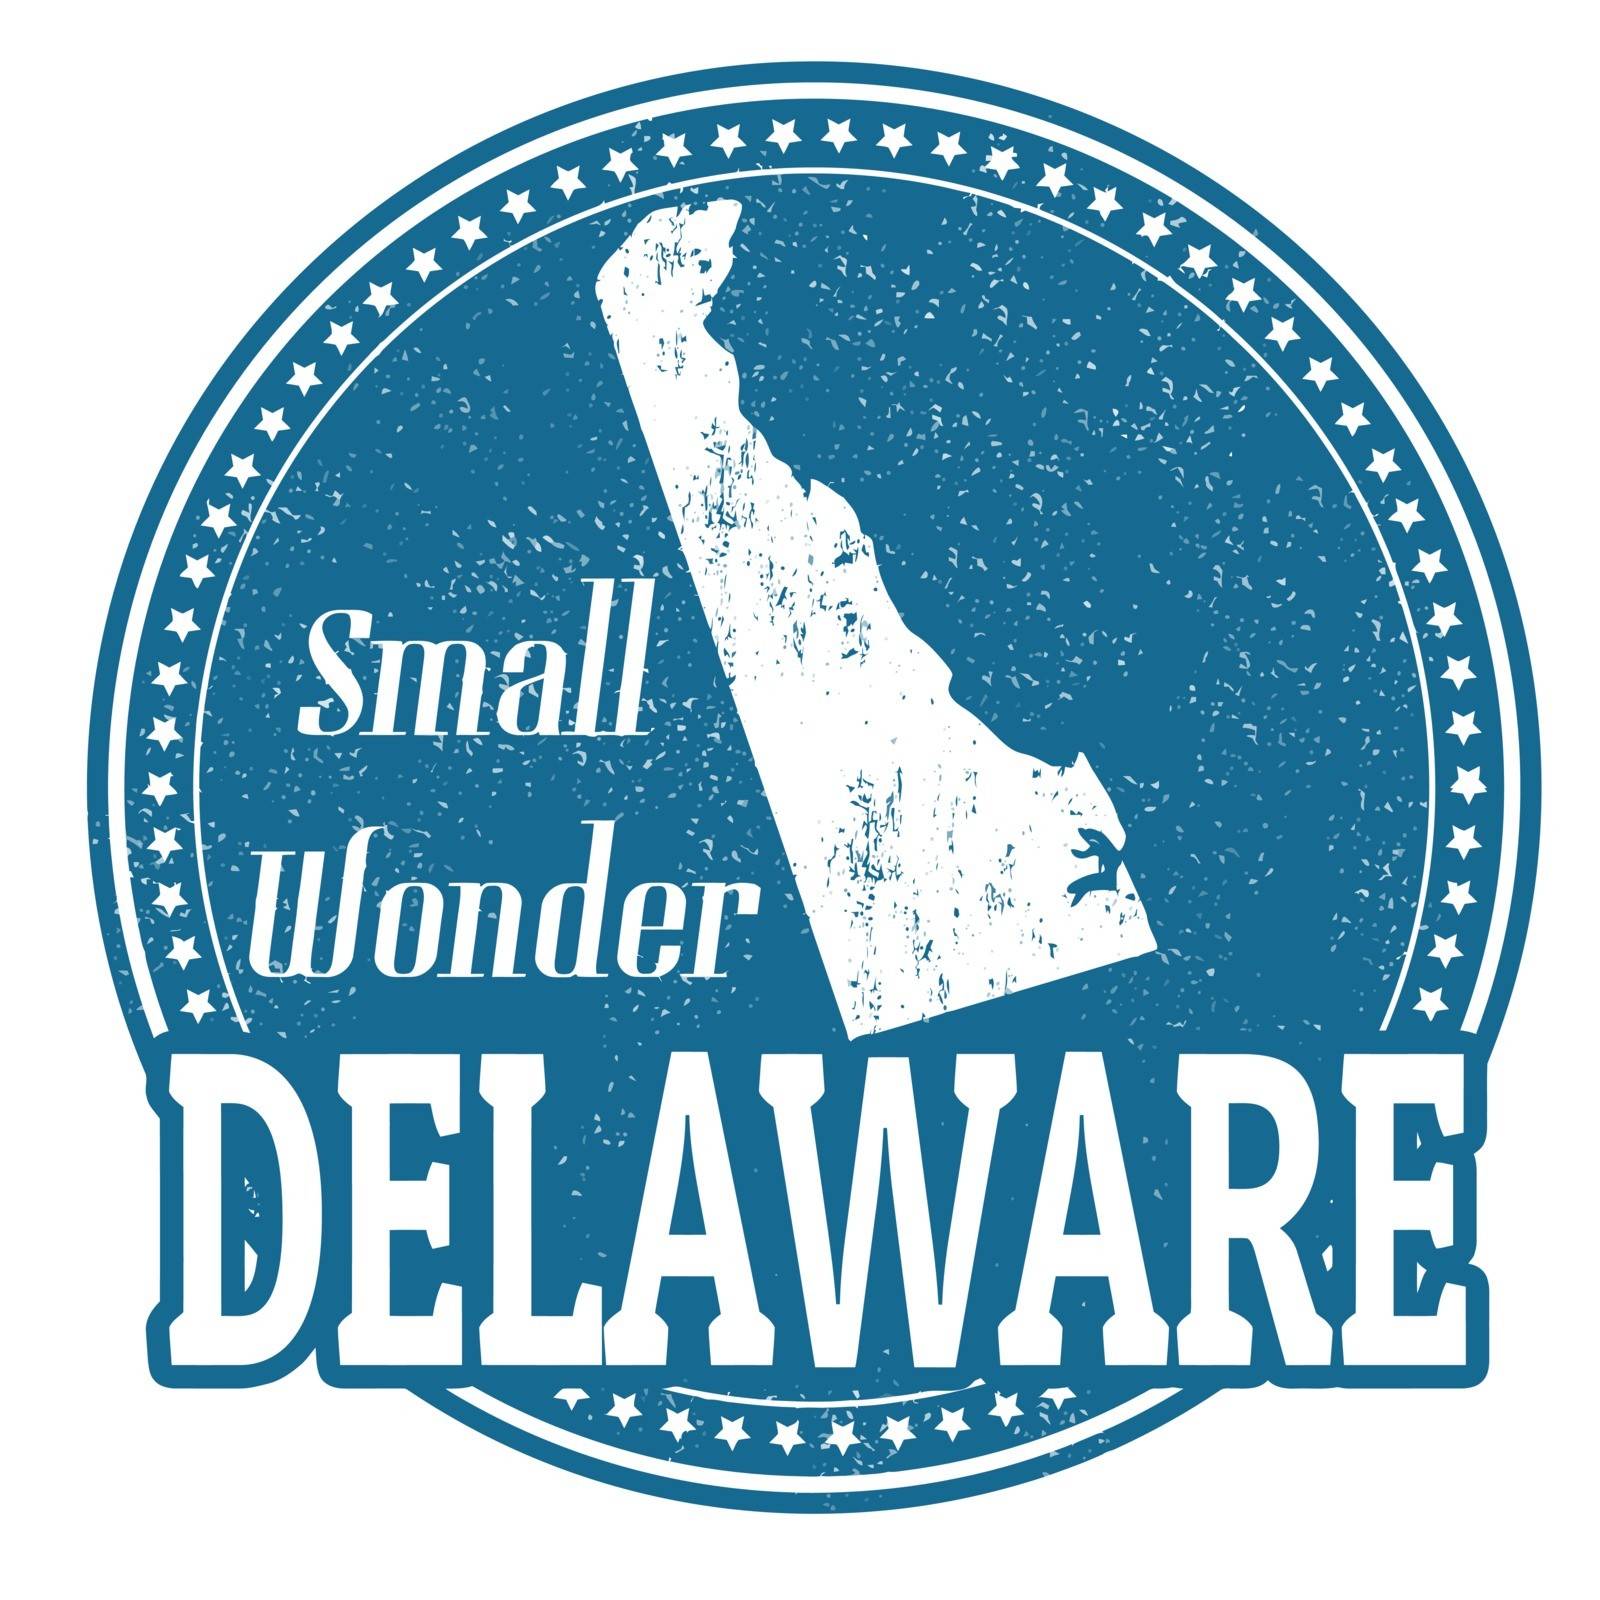 Delaware stamp by roxanabalint